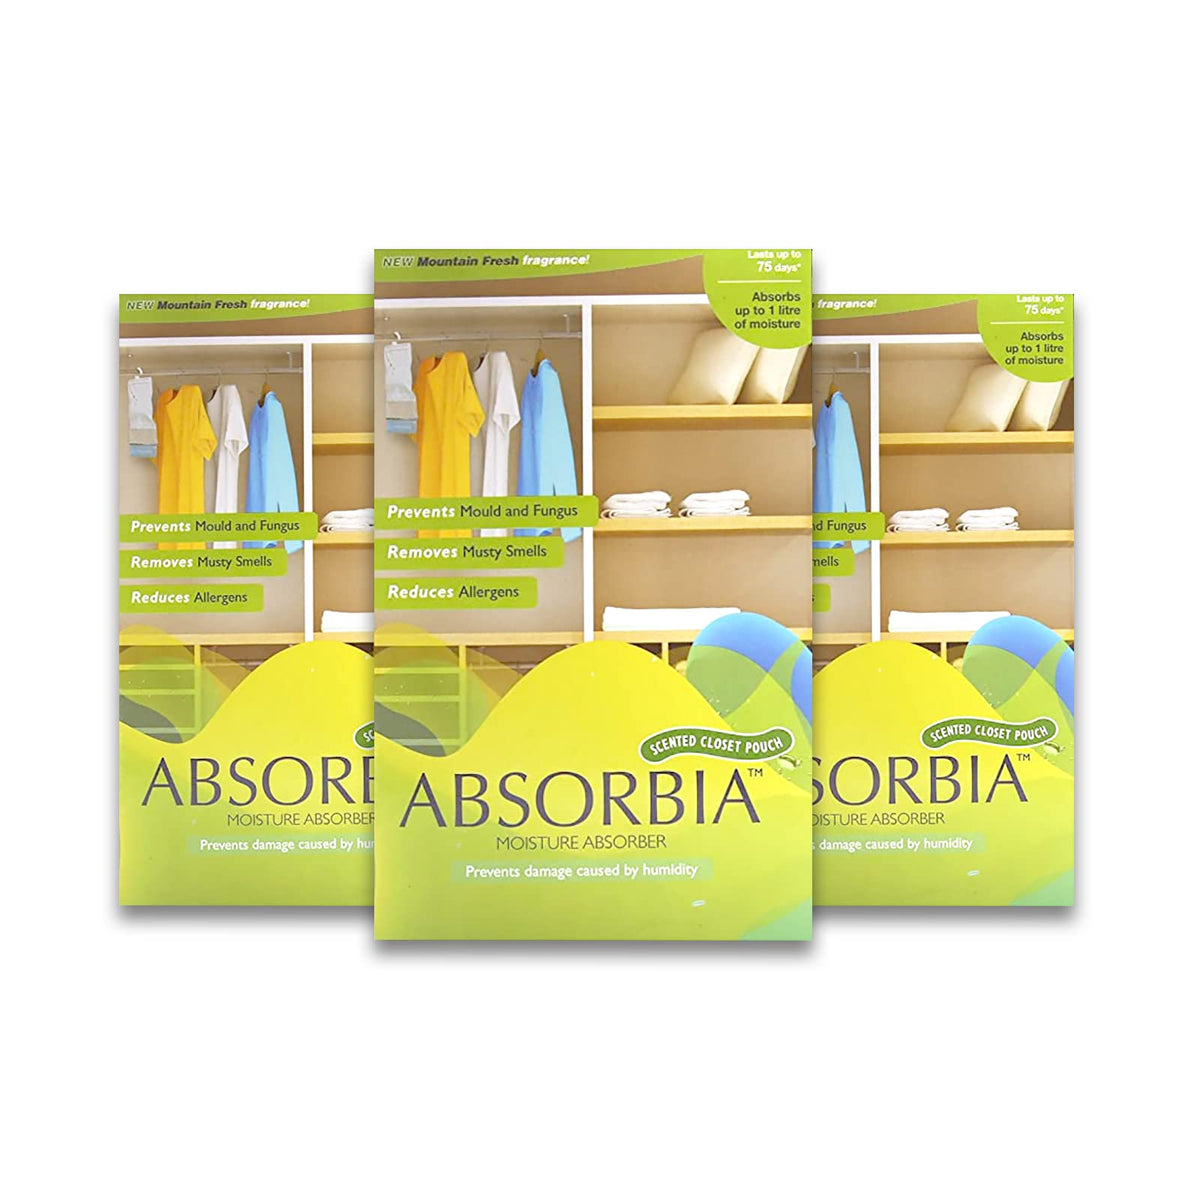 Absorbia Moisture Absorber Hanging Pouch | Mountain Fresh Fragrance - Pack of 3 ( 440 gms X 3 Pouches) | Absorption Capacity 1000 ml each | Odour Absorber & Dehumidifier for Wardrobe, Closet & Bathroom| Fights Against Moisture, Mould, Fungus & Musty